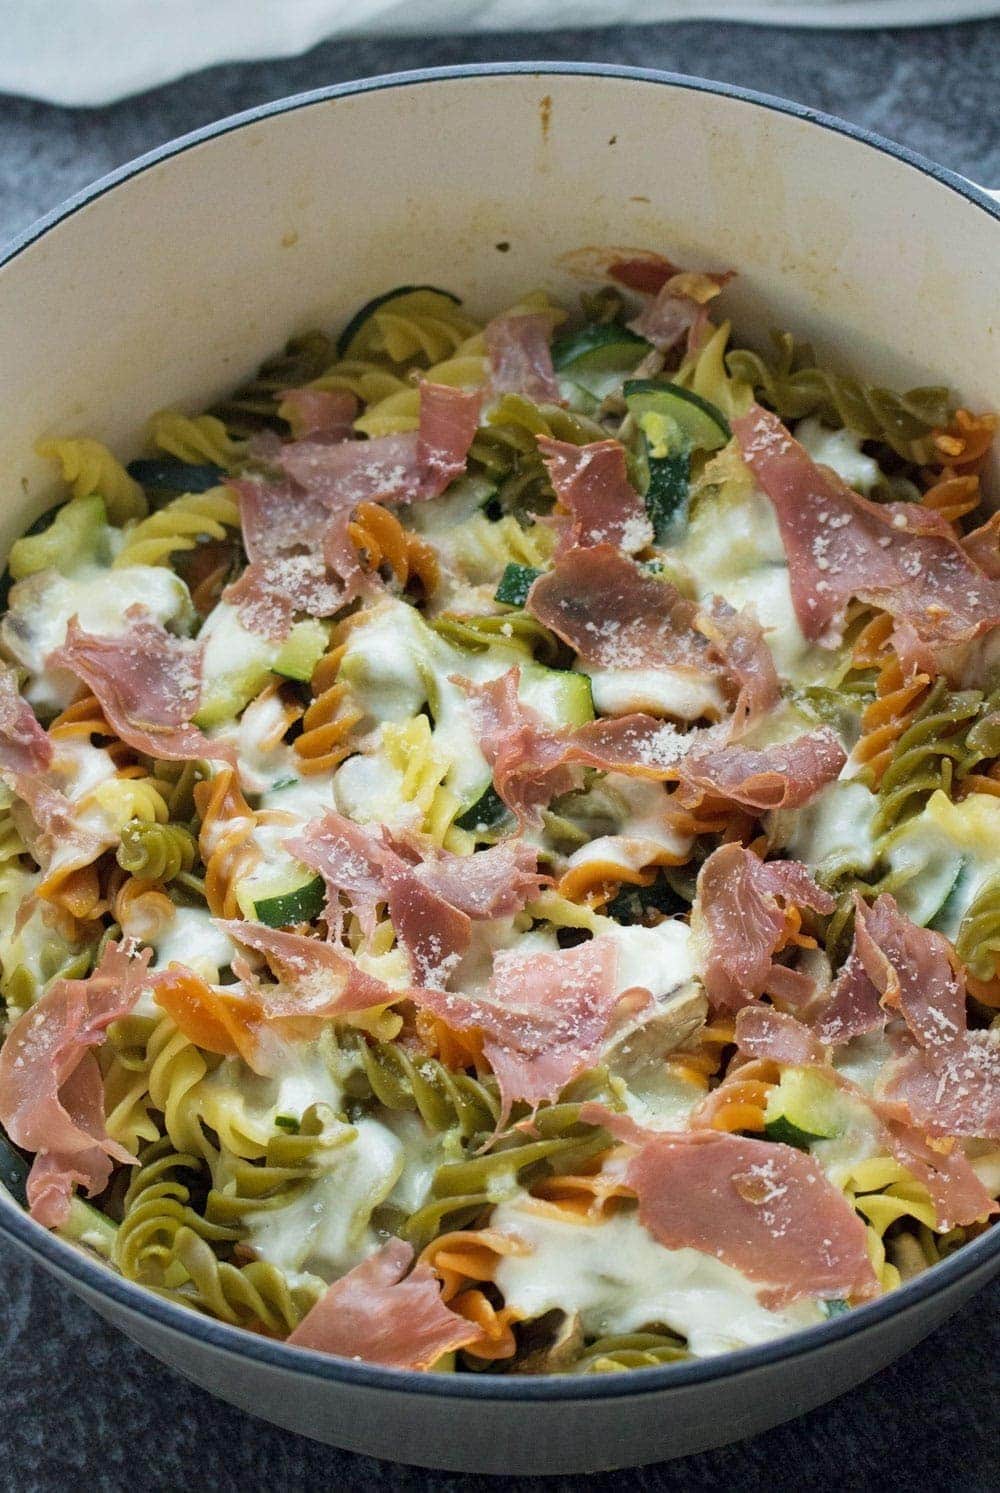 This courgette & prosciutto one pot pasta recipe is so quick and easy. Throw everything in the pot and 20 minutes later you've got dinner on the table!